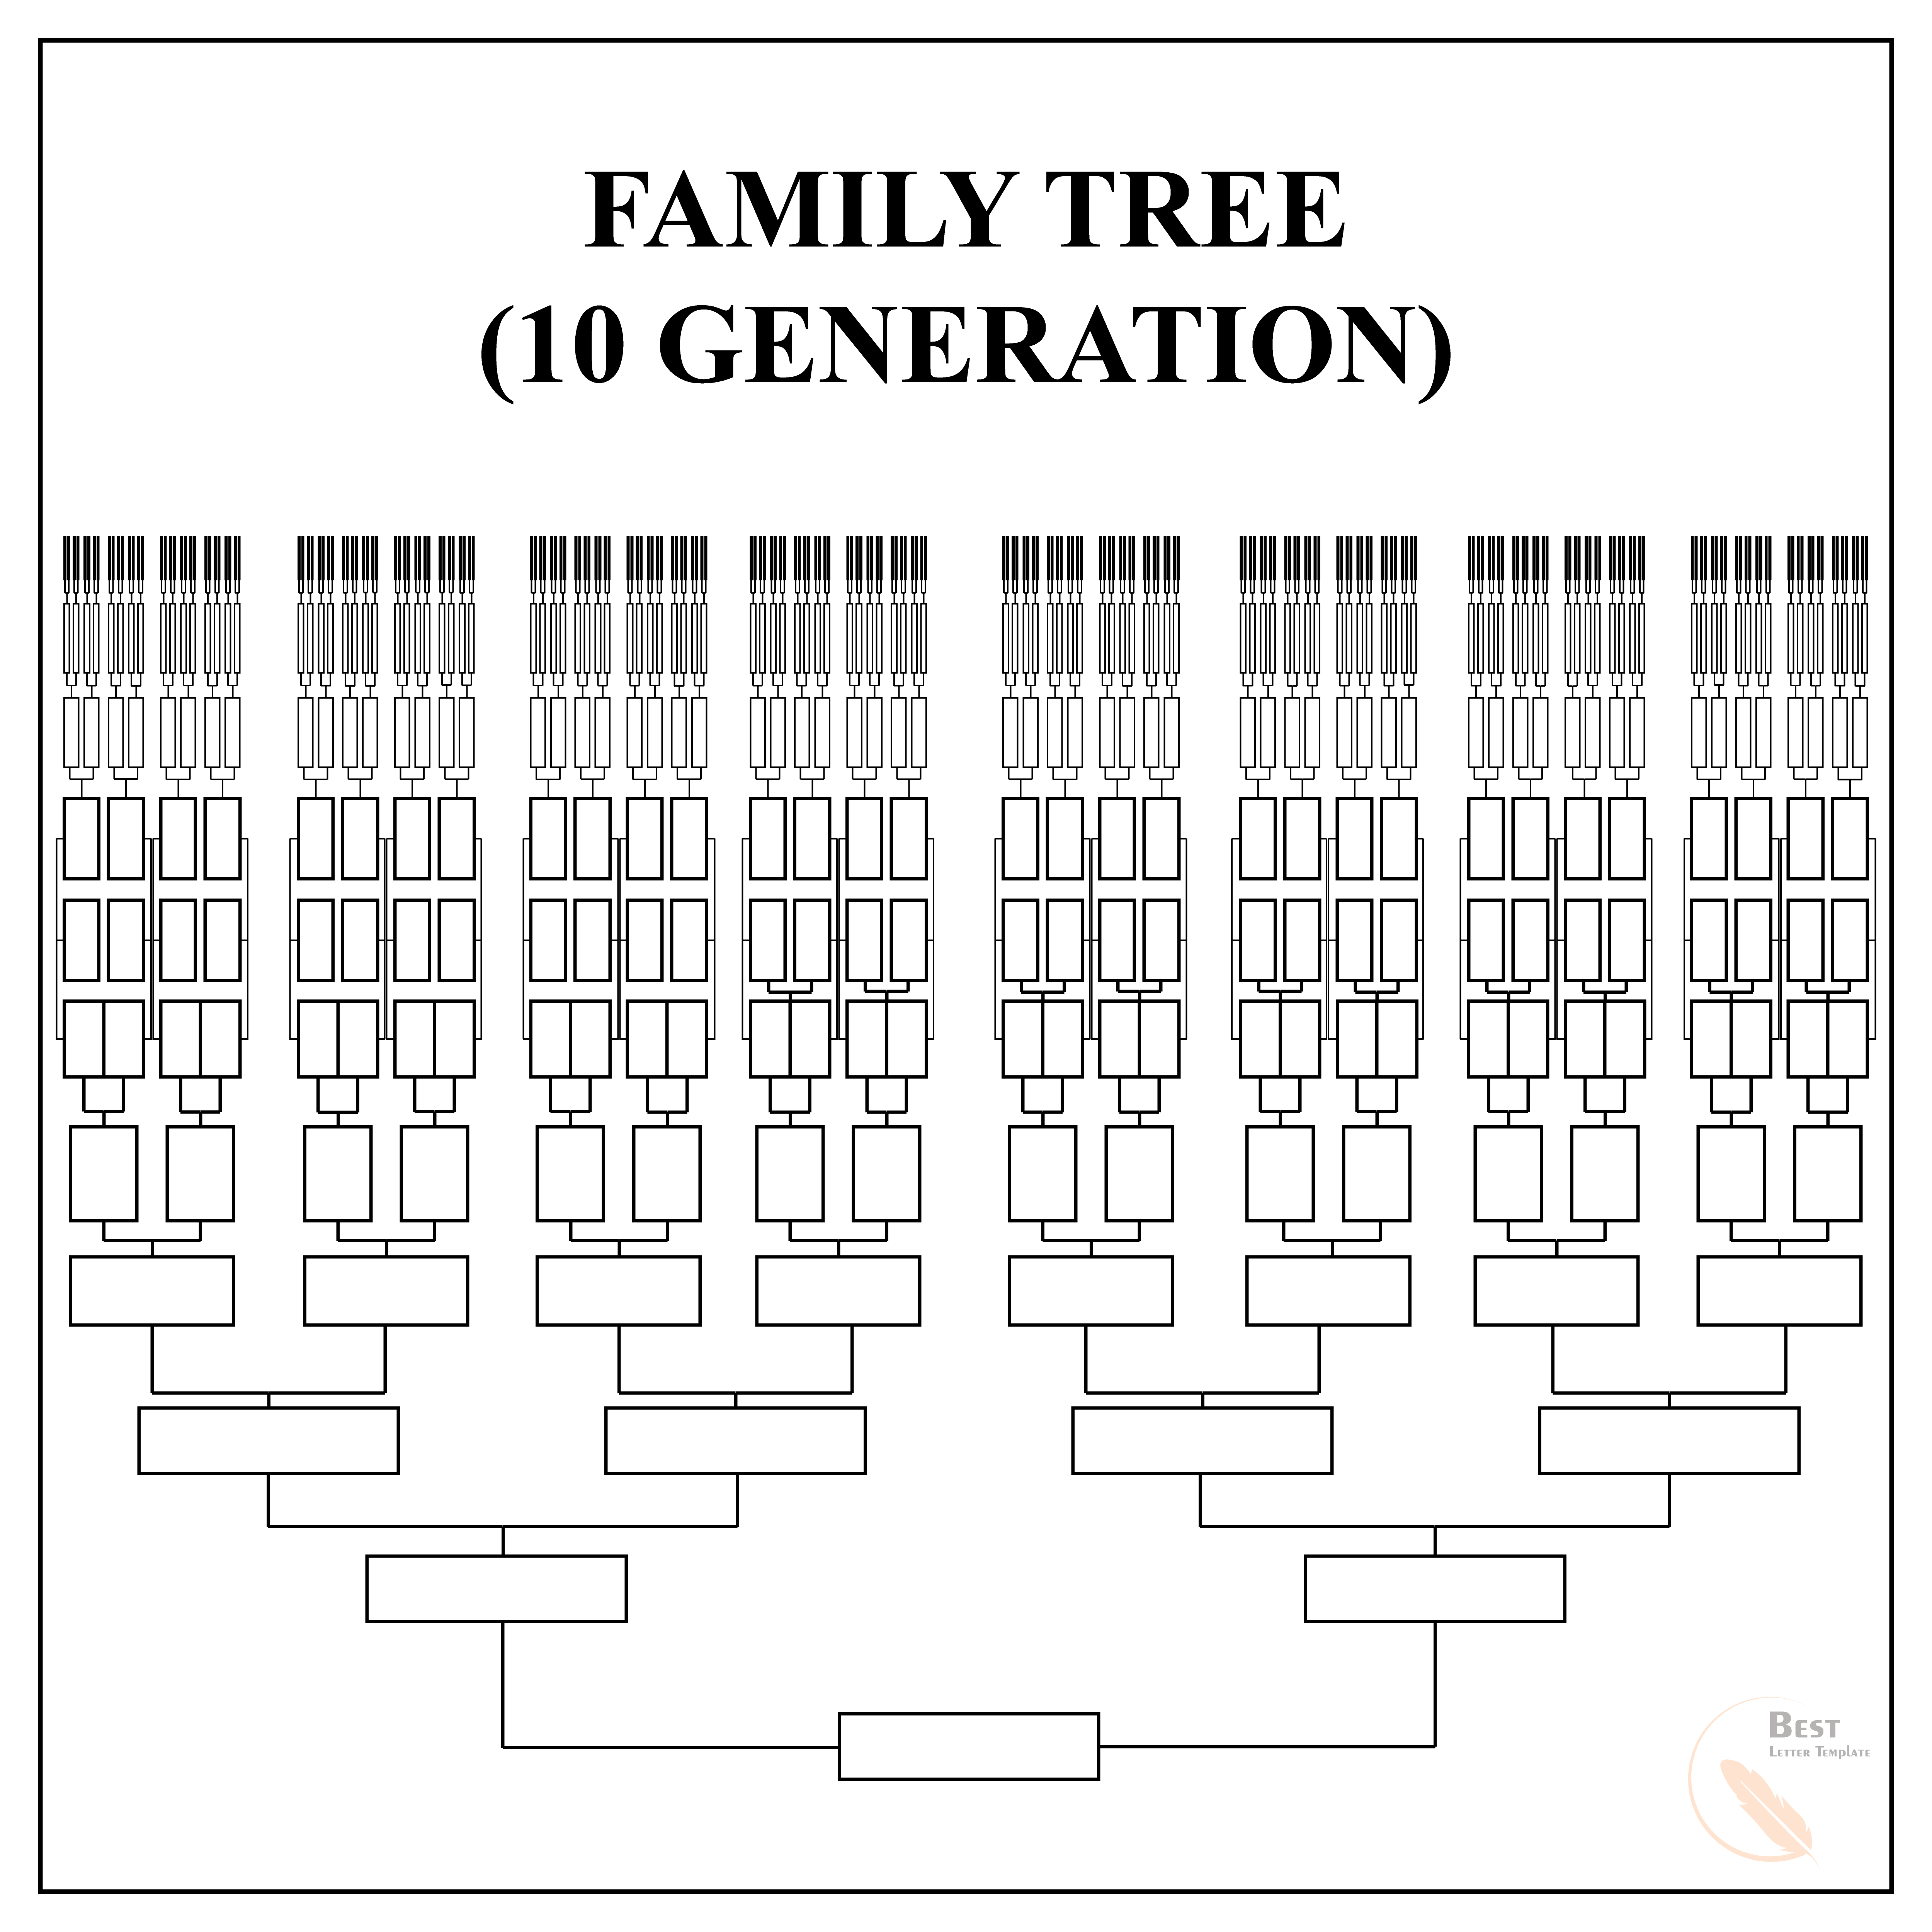 Family Tree Template for 10 Generation